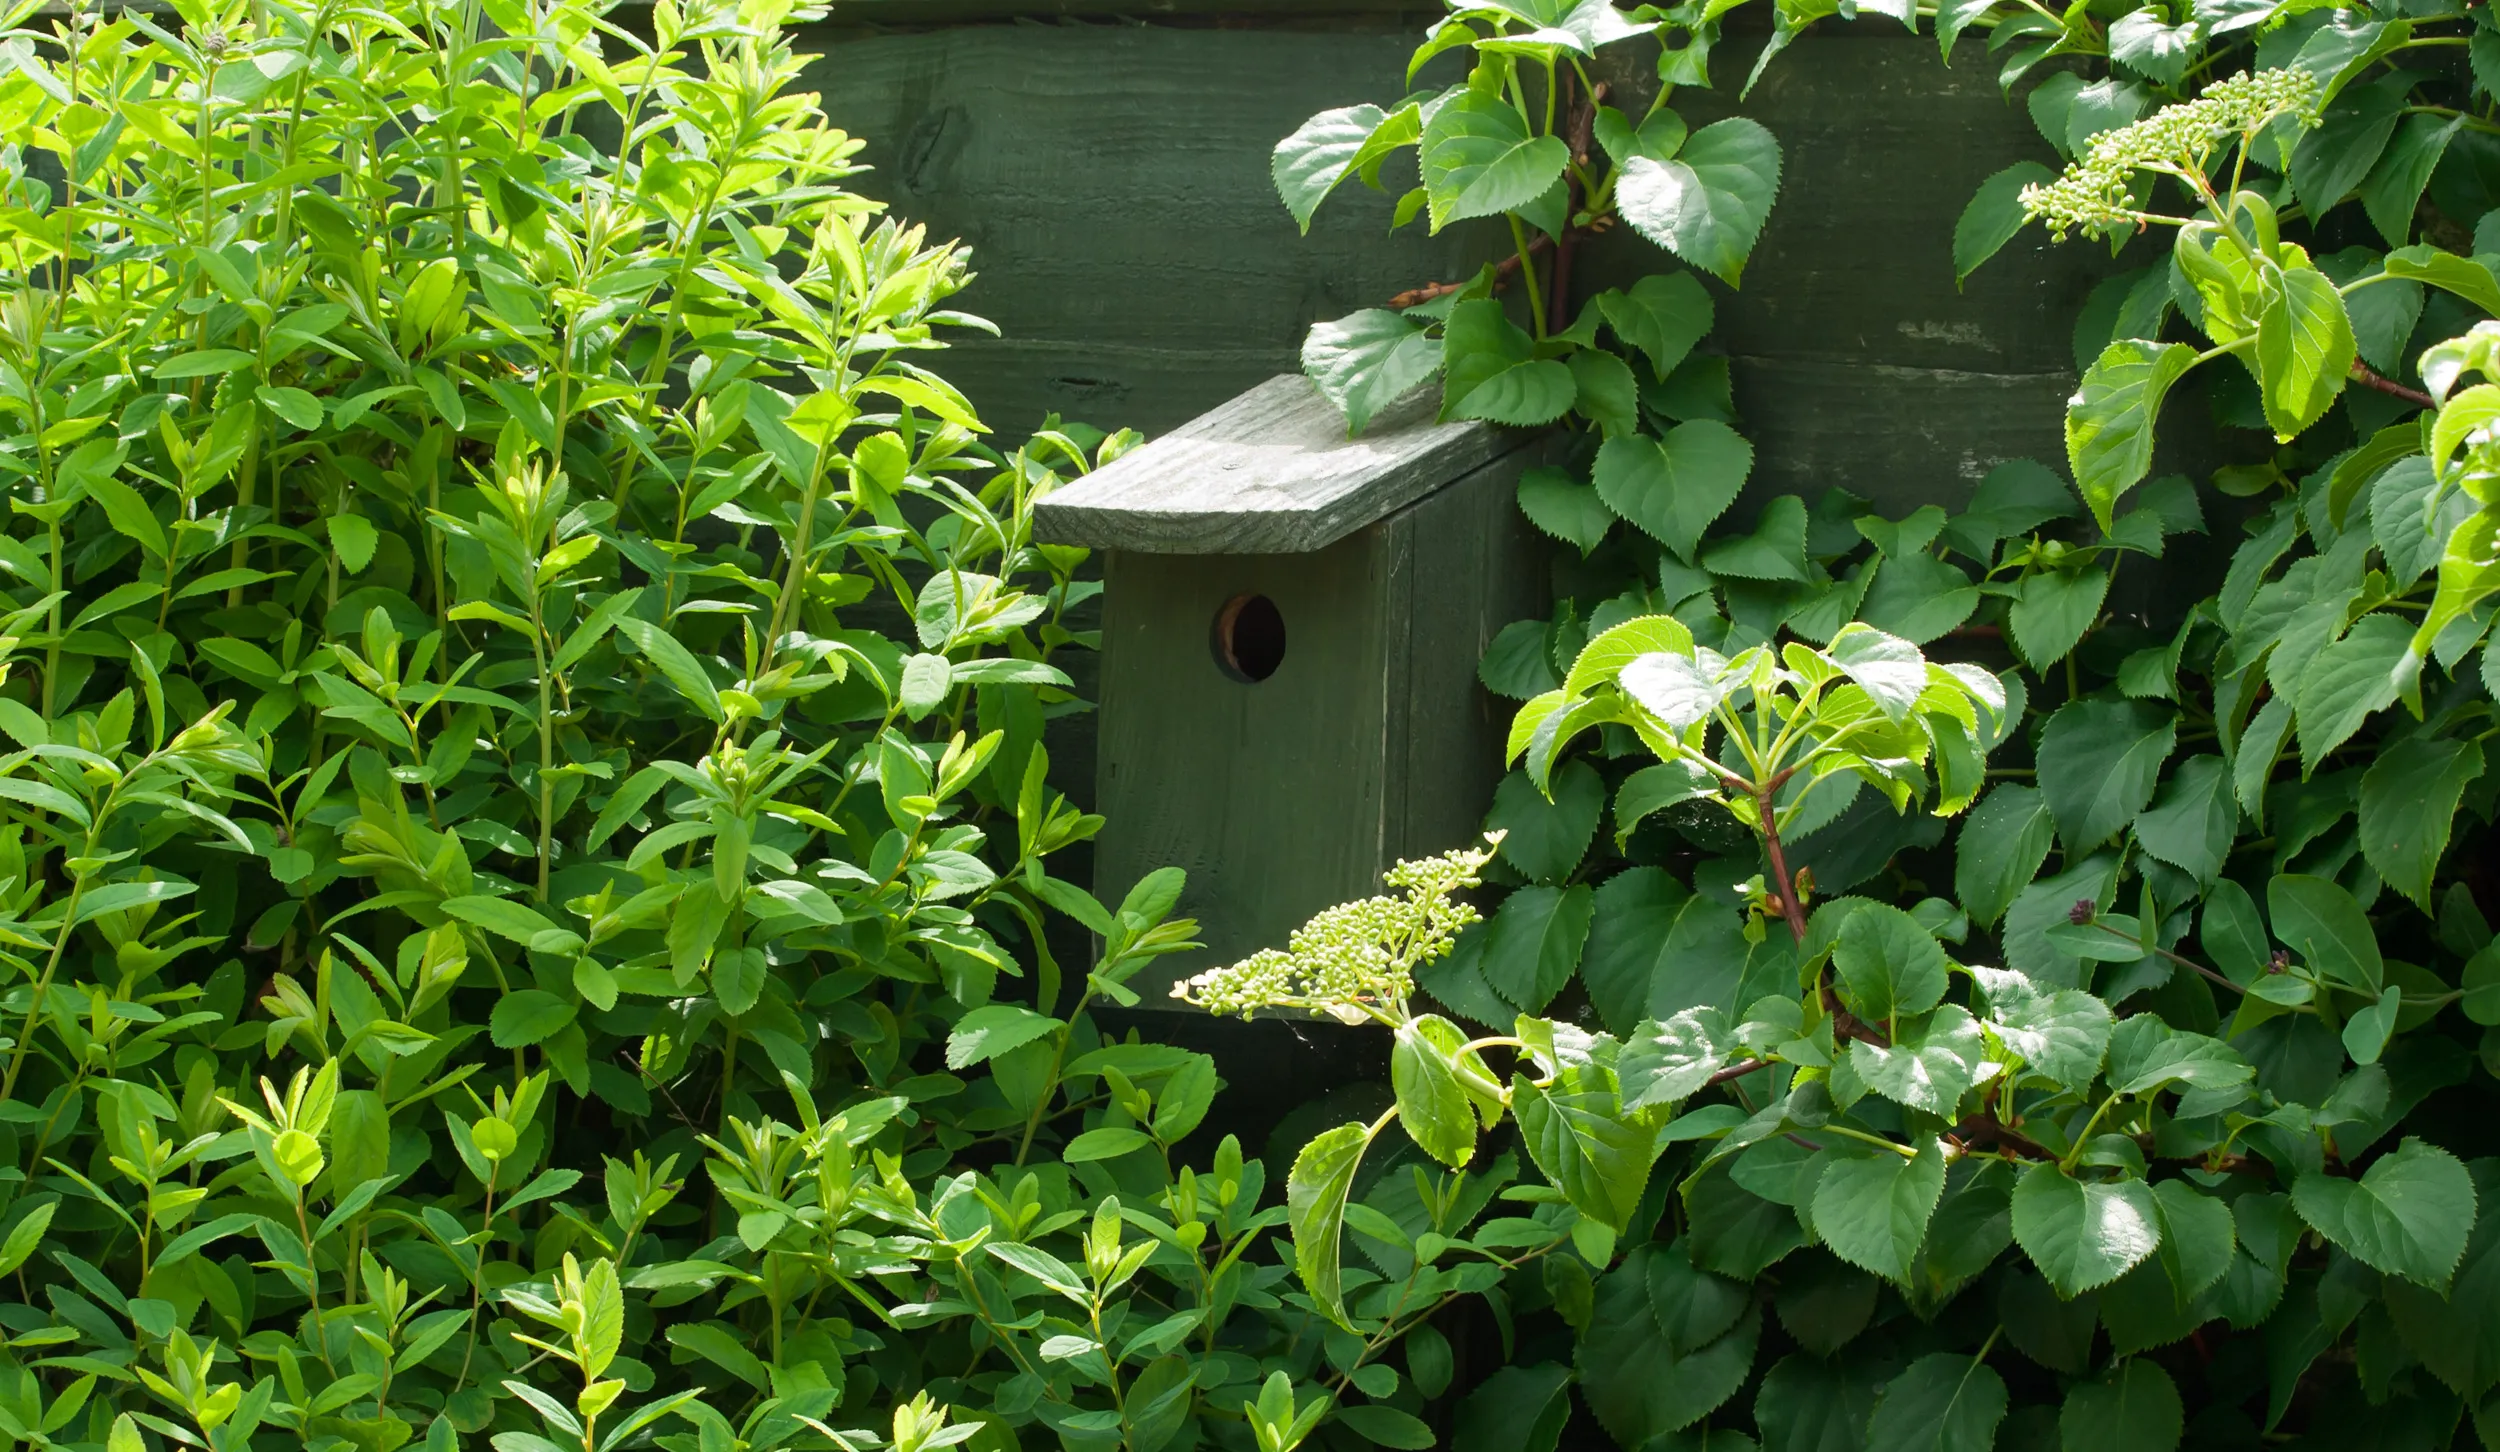 A wooden birdbox, painted the same dark green as the fence panel it's mounted to and surrounded by leafy foliage.